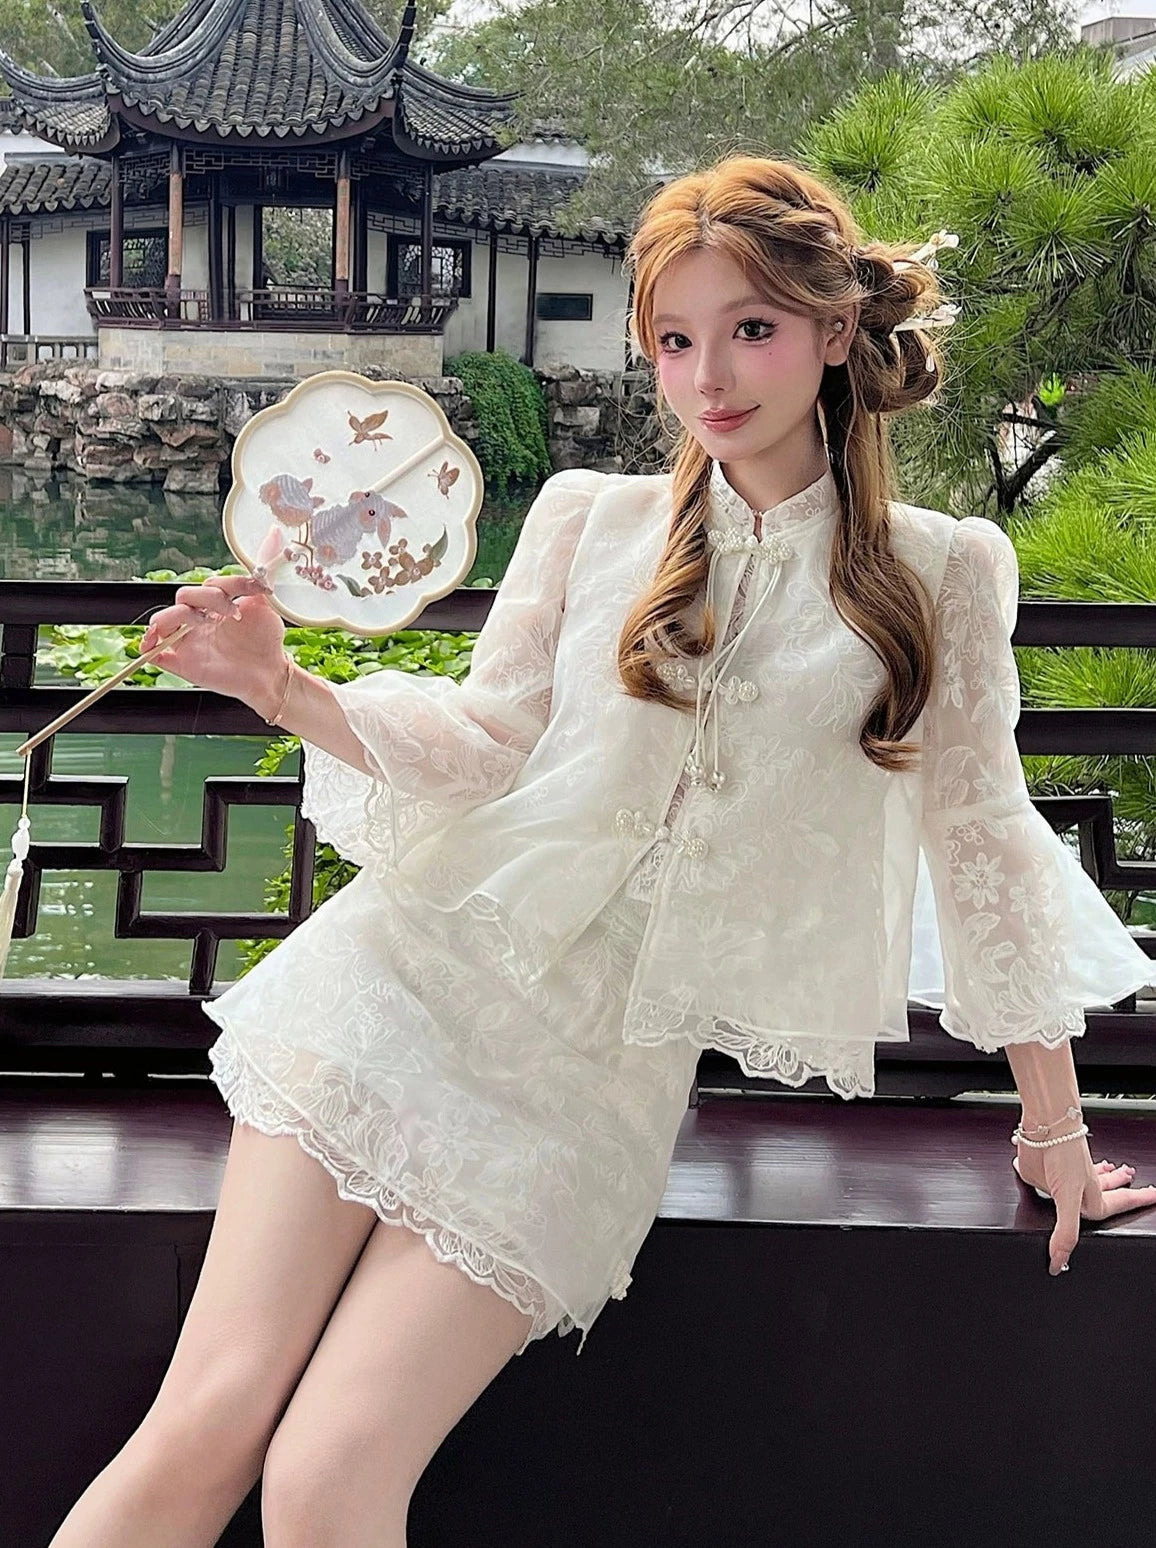 China Pearl Plate Button Tops + Lace Mini skirt